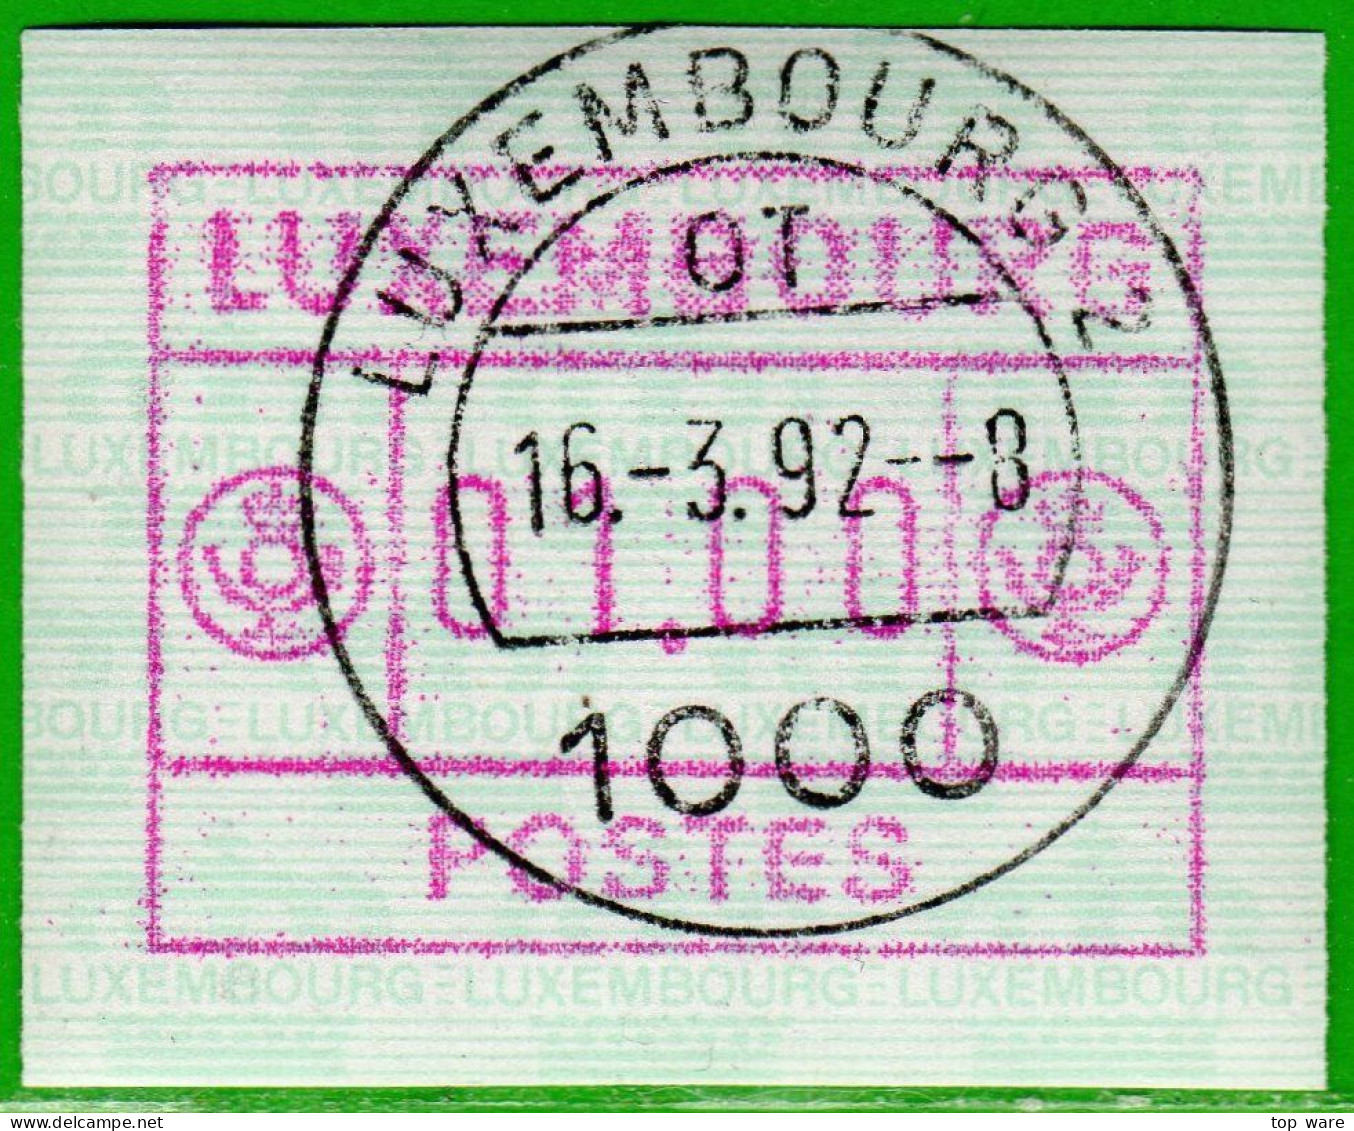 Luxemburg Luxembourg Timbres ATM 2 D Kleines Postes Rotlila / 01.00 Ersttag Tages-O 16.3.1992 / Frama Automatenmarken - Frankeervignetten